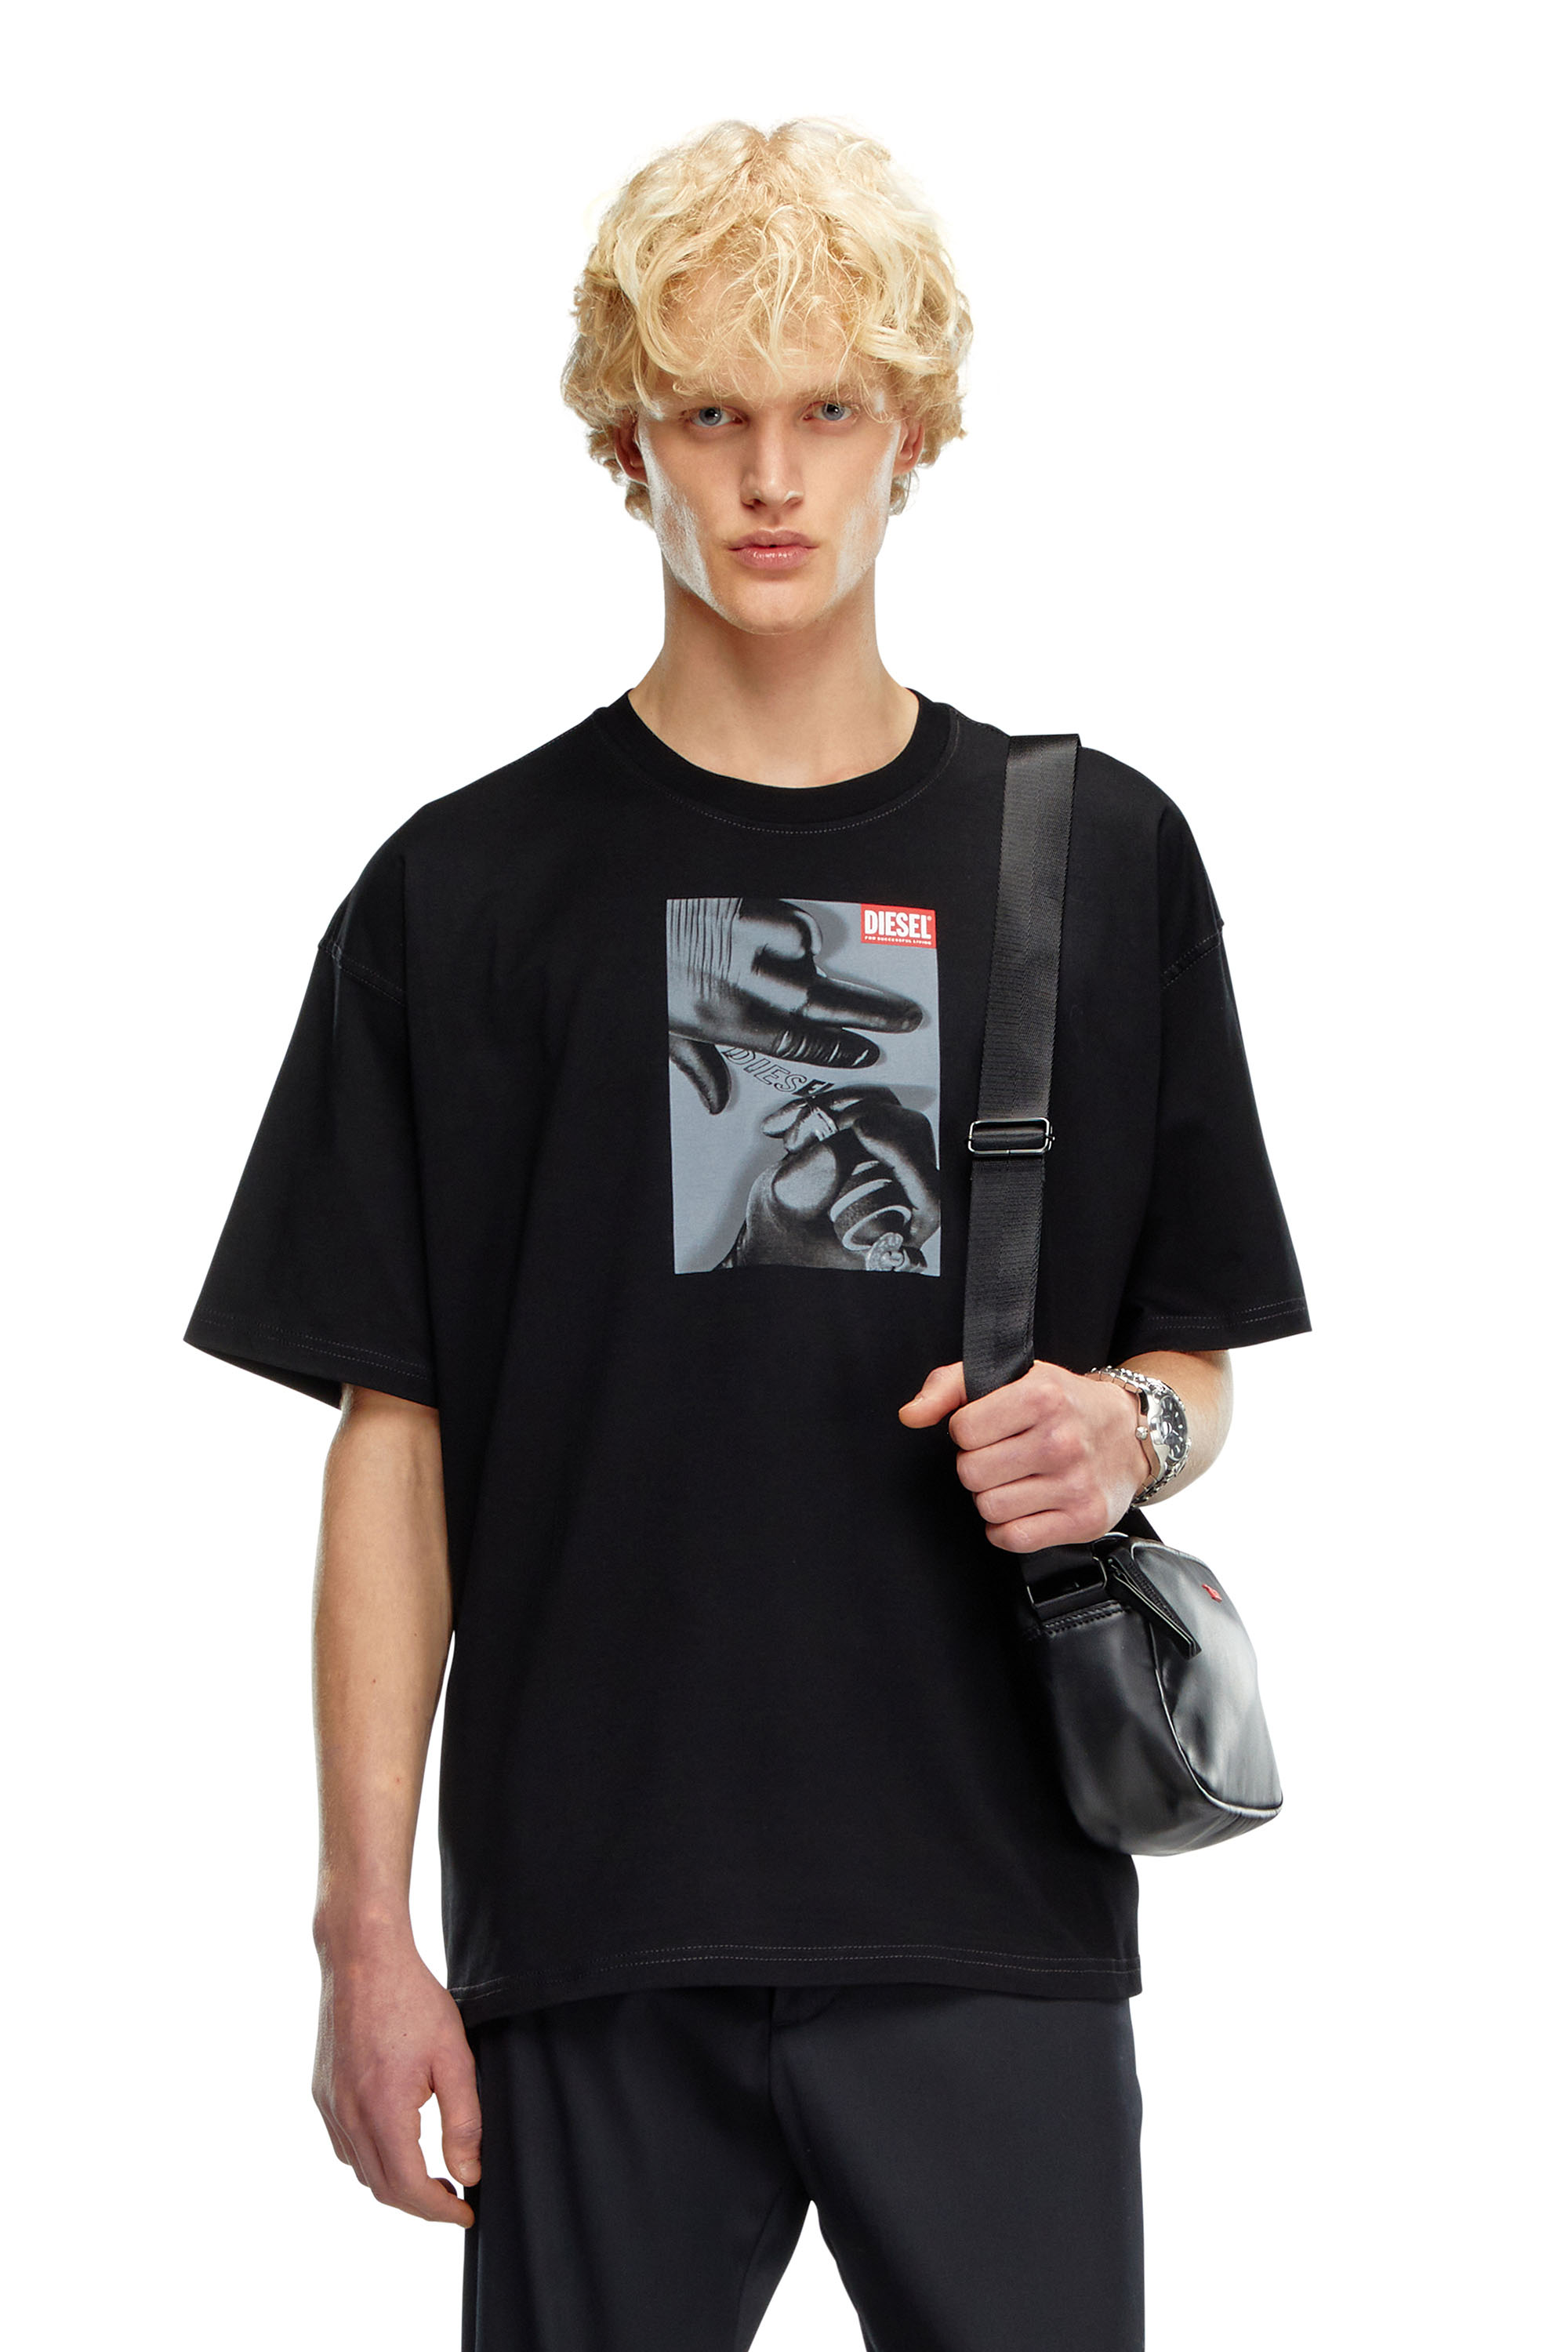 Diesel - T-BOXT-K4, Male T-shirt with tattoo glove print in ブラック - Image 1